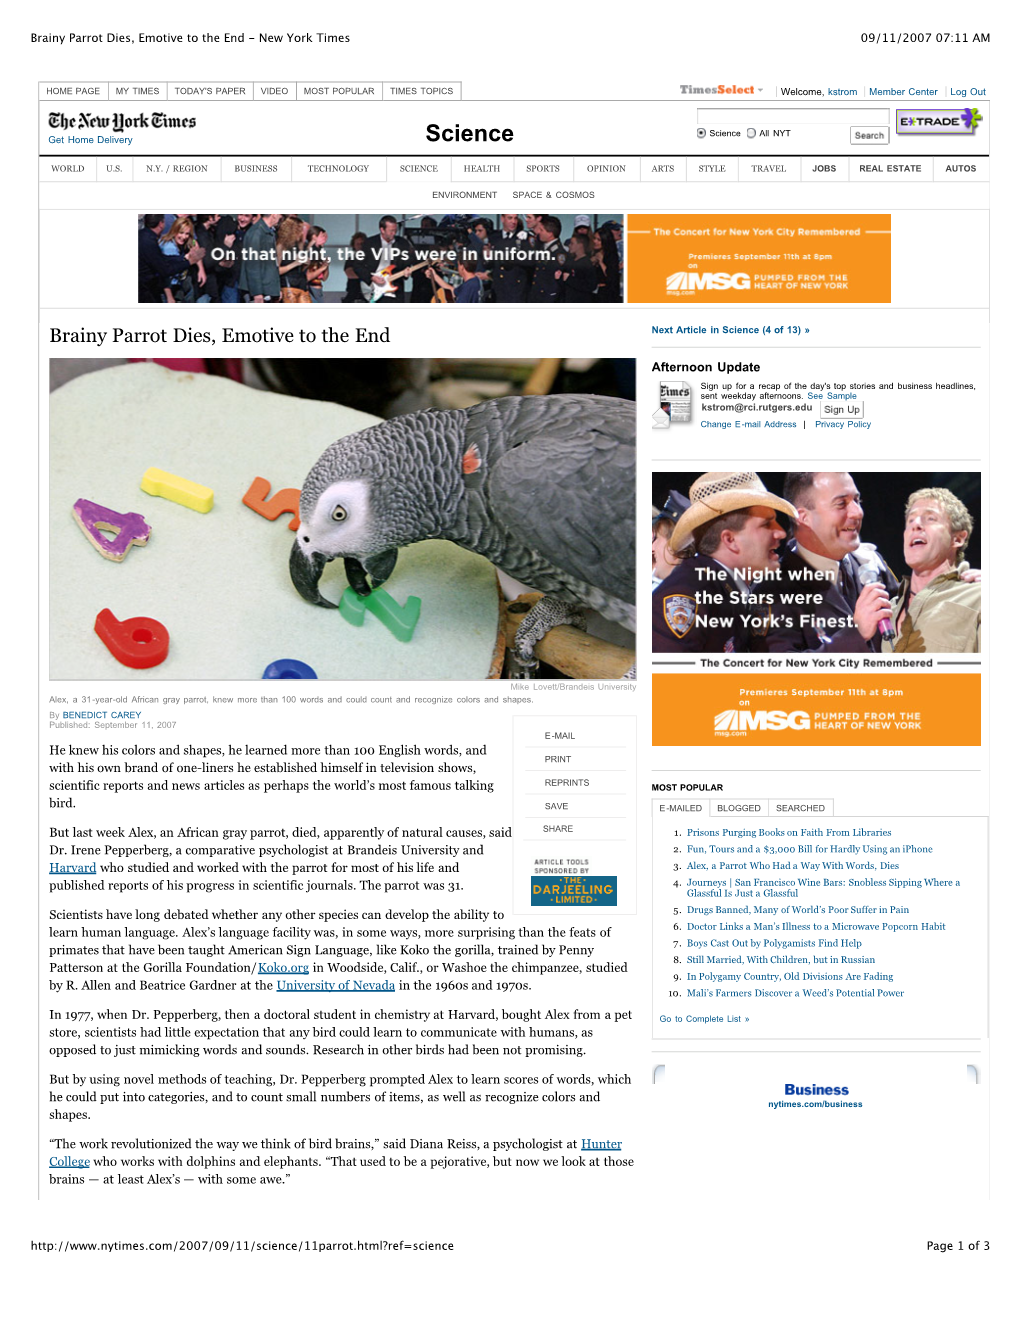 Brainy Parrot Dies, Emotive to the End - New York Times 09/11/2007 07:11 AM